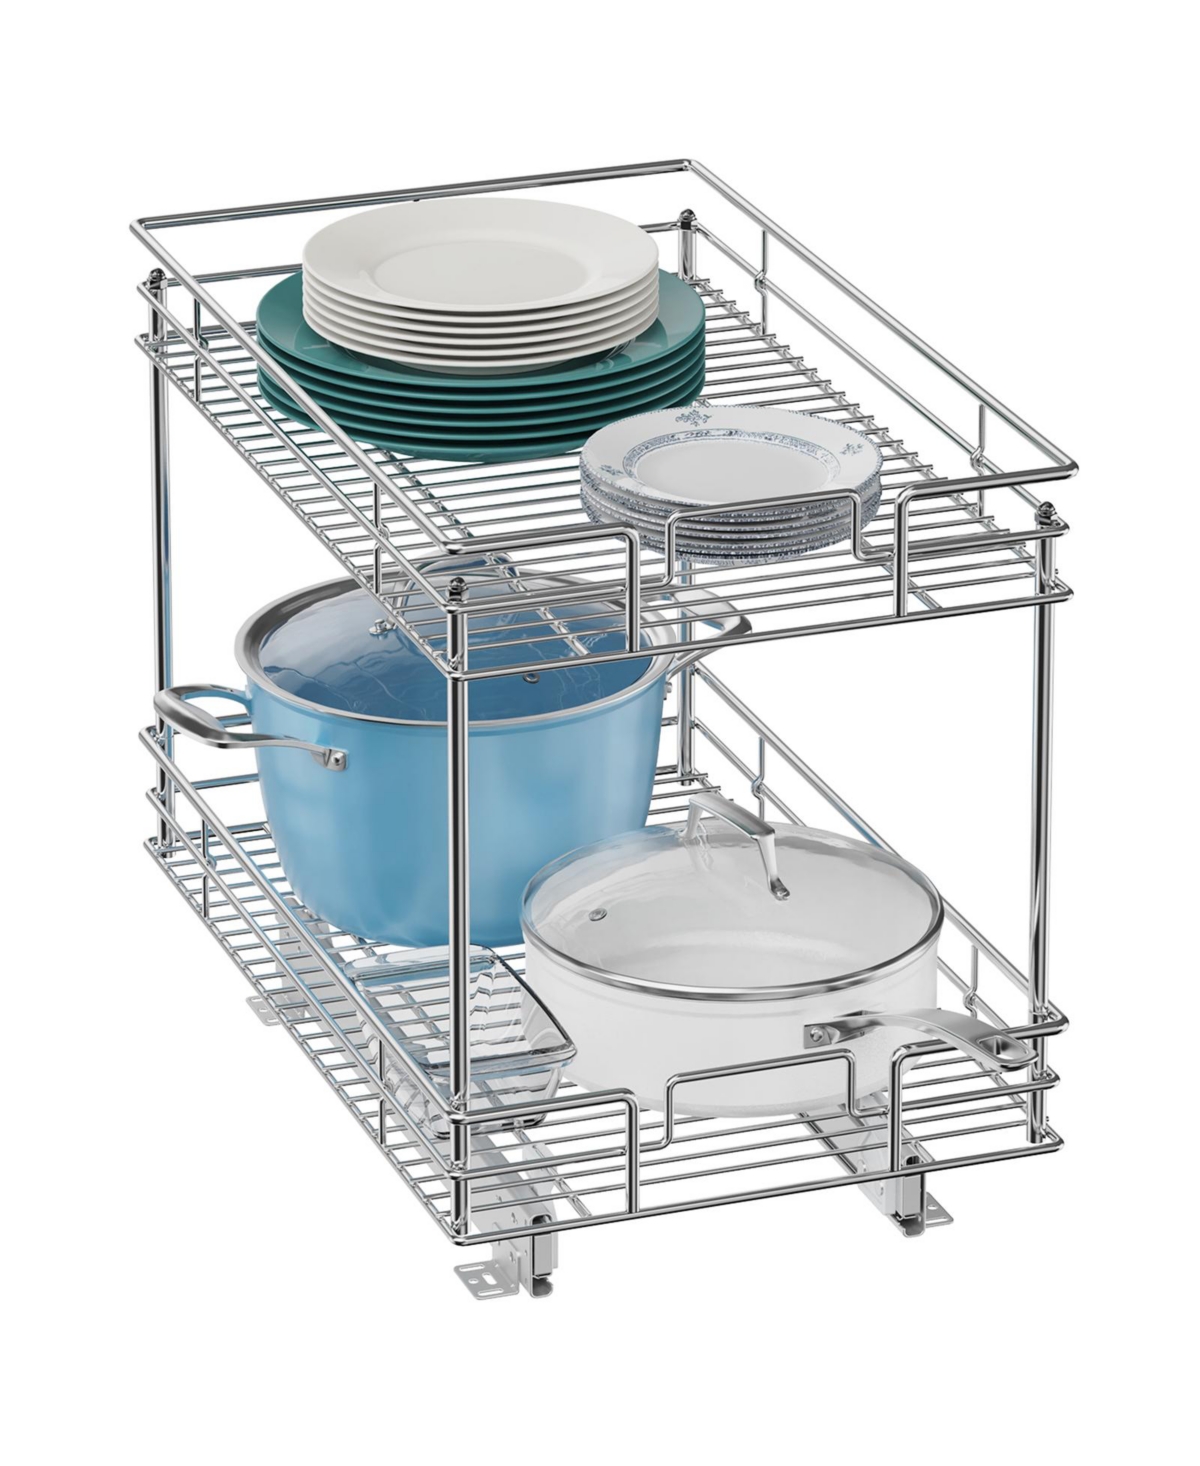 Pull-Out 2 Tier Home Organizers with Sliding Track in the Middle - 21"D x 14"W x 16.4"H Sliver - Silver